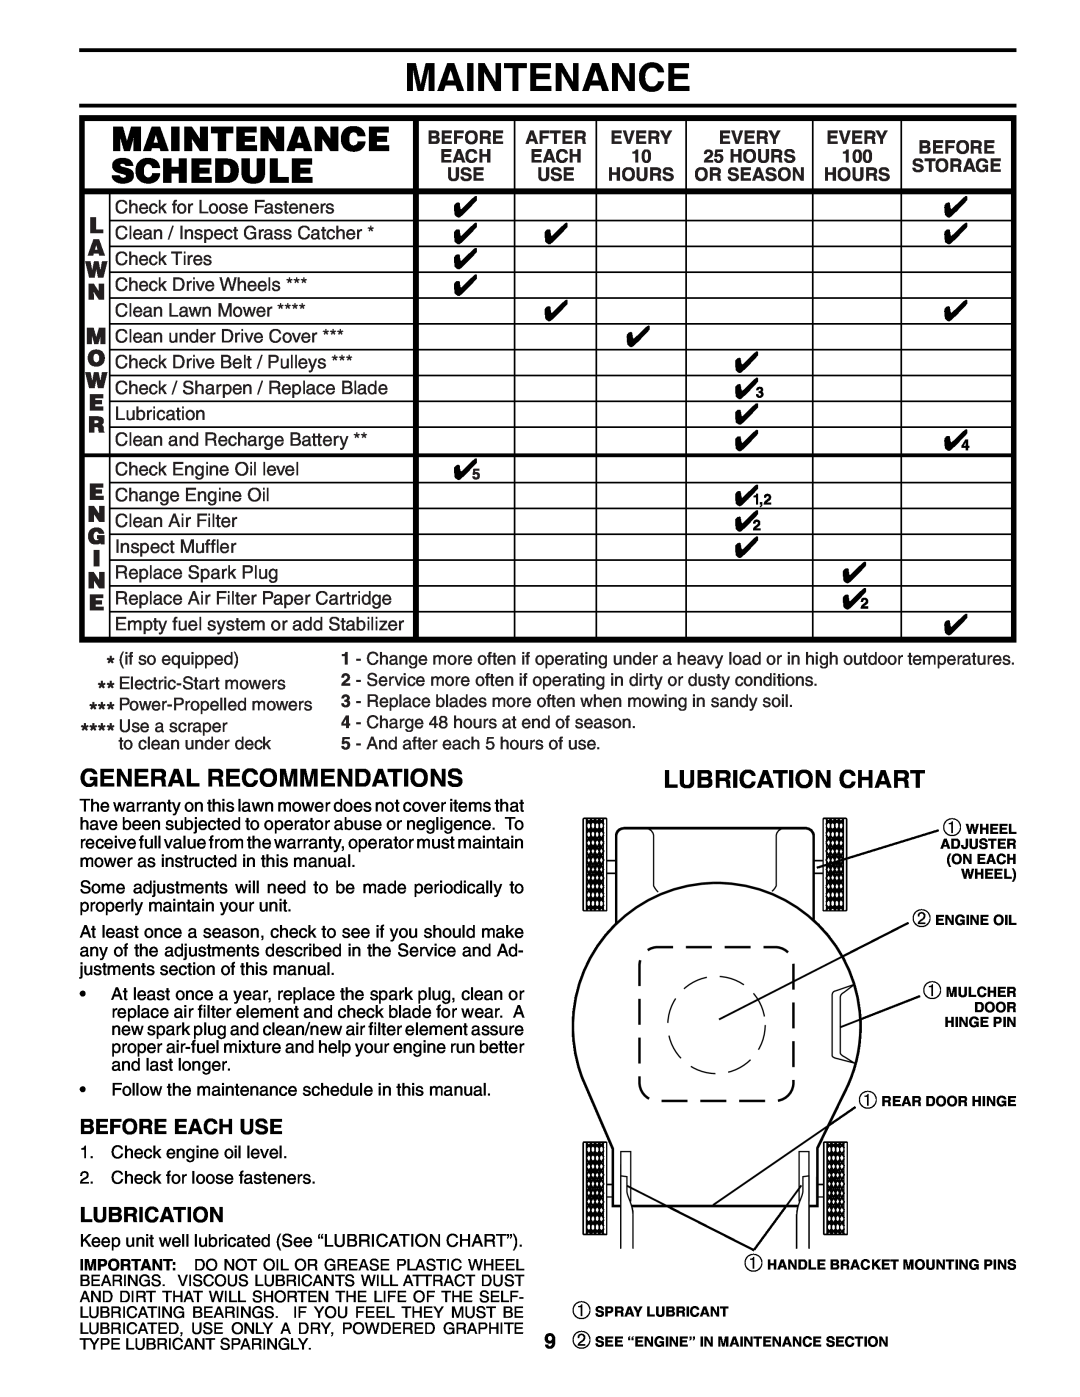 Husqvarna 65021ES Maintenance, General Recommendations, Lubrication Chart, Before Each Use, After, Every, Storage, Hours 